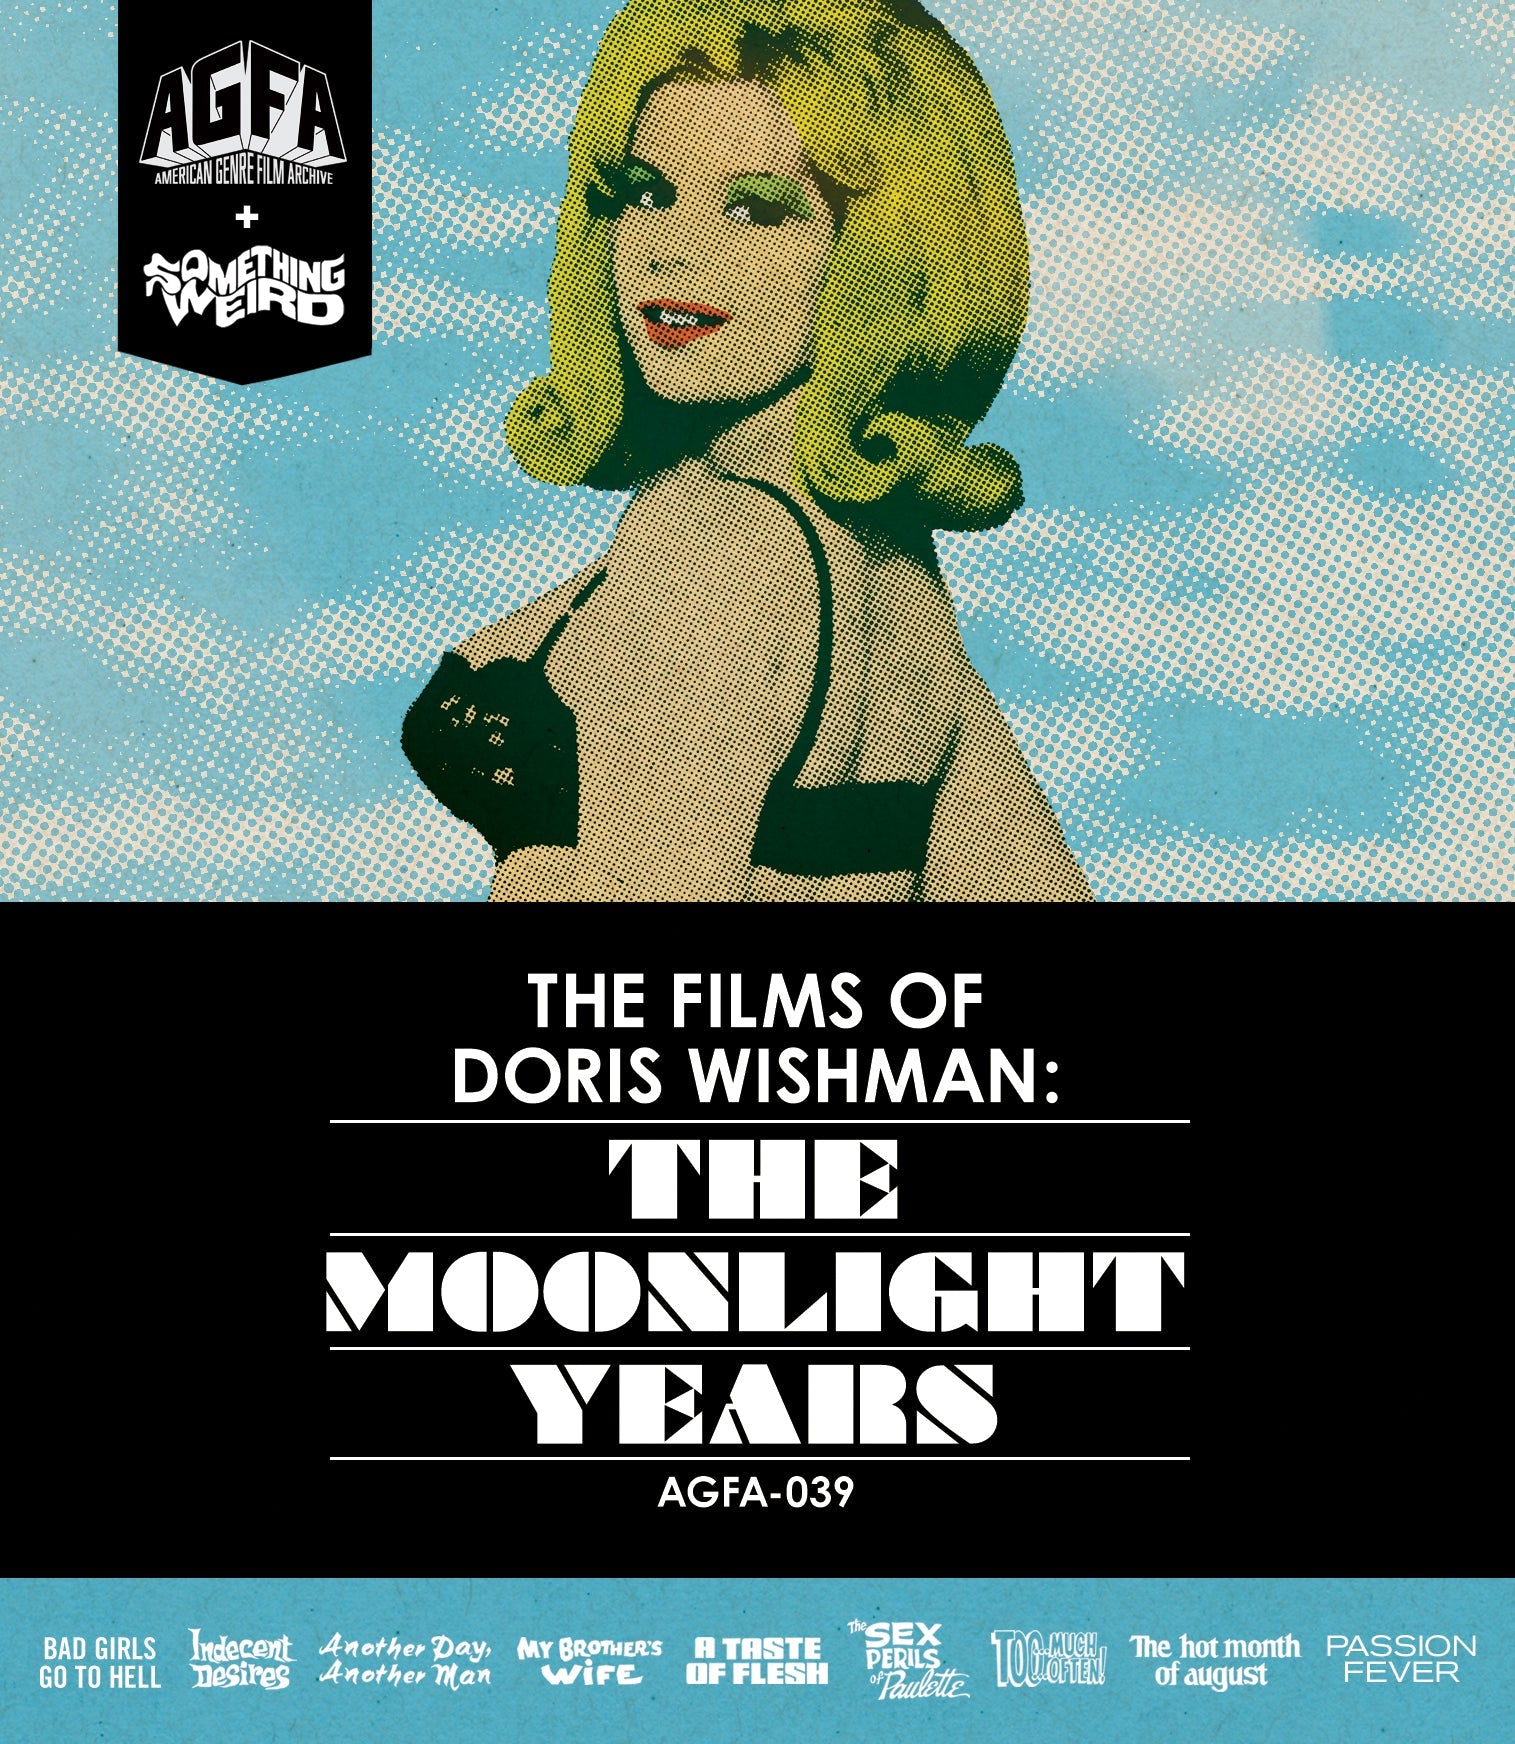 THE FILMS OF DORIS WISHMAN: THE MOONLIGHT YEARS (LIMITED EDITION) BLU-RAY